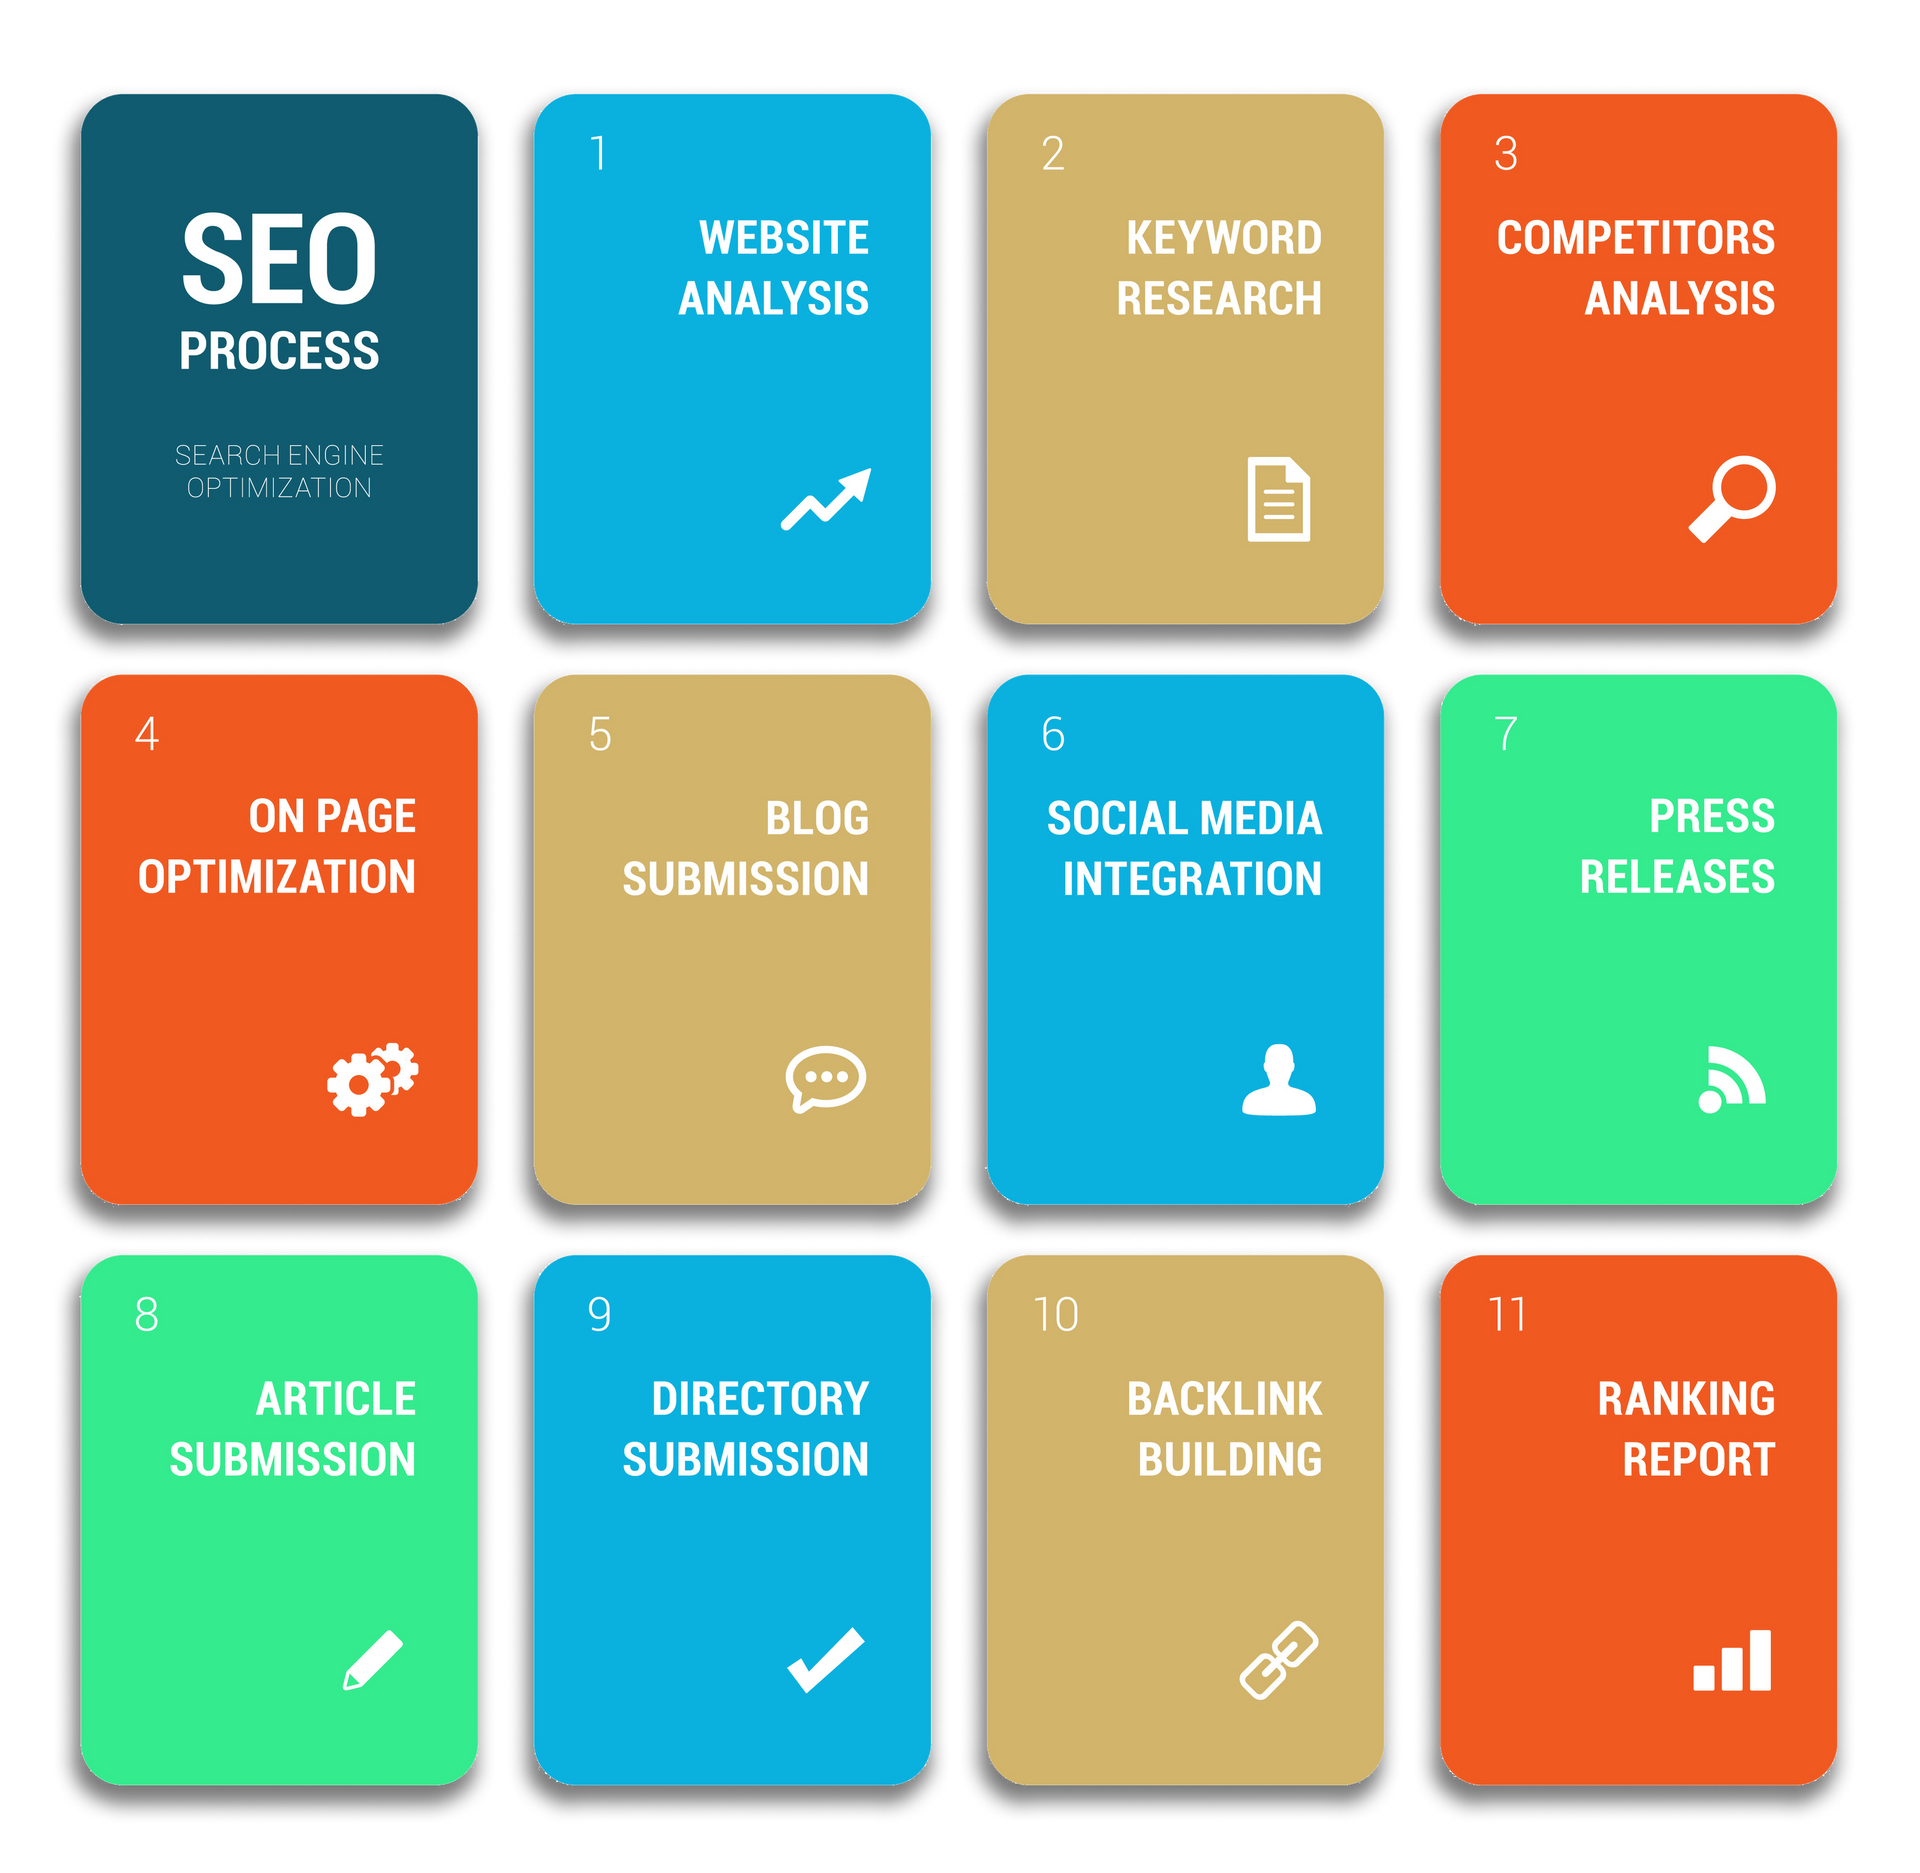 a grid of cards with the seo process on them in 11 steps